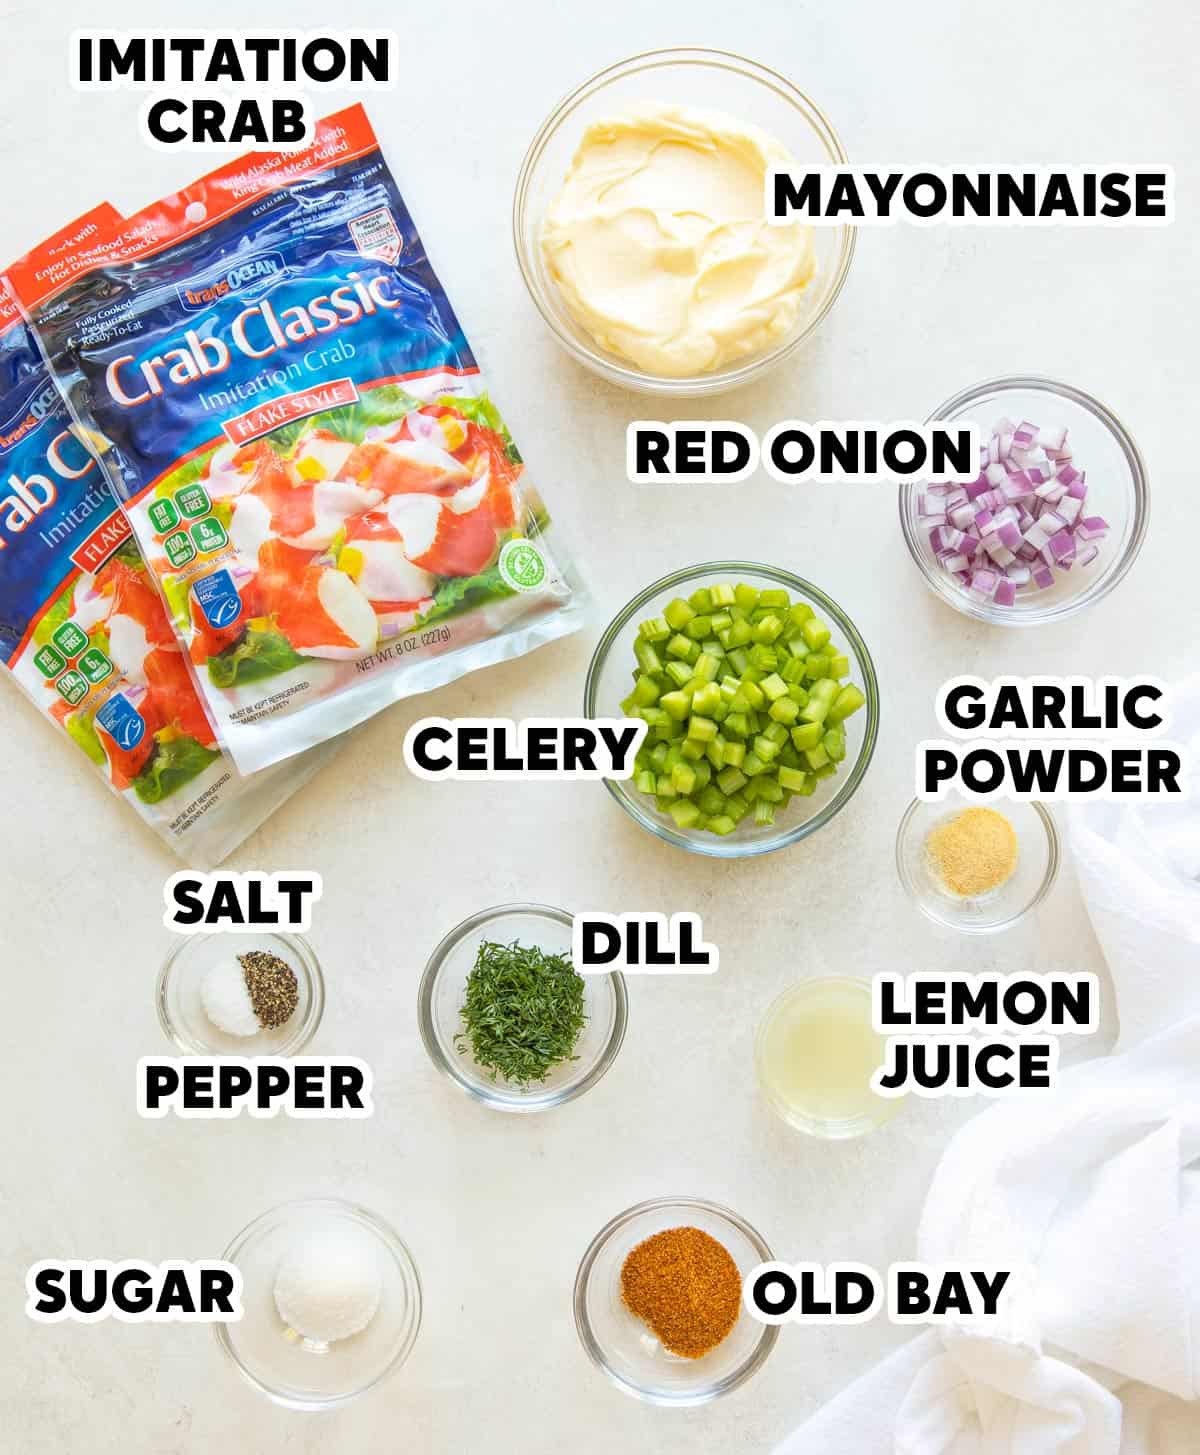 Ingredients for making imitation crab salad with overlay text.